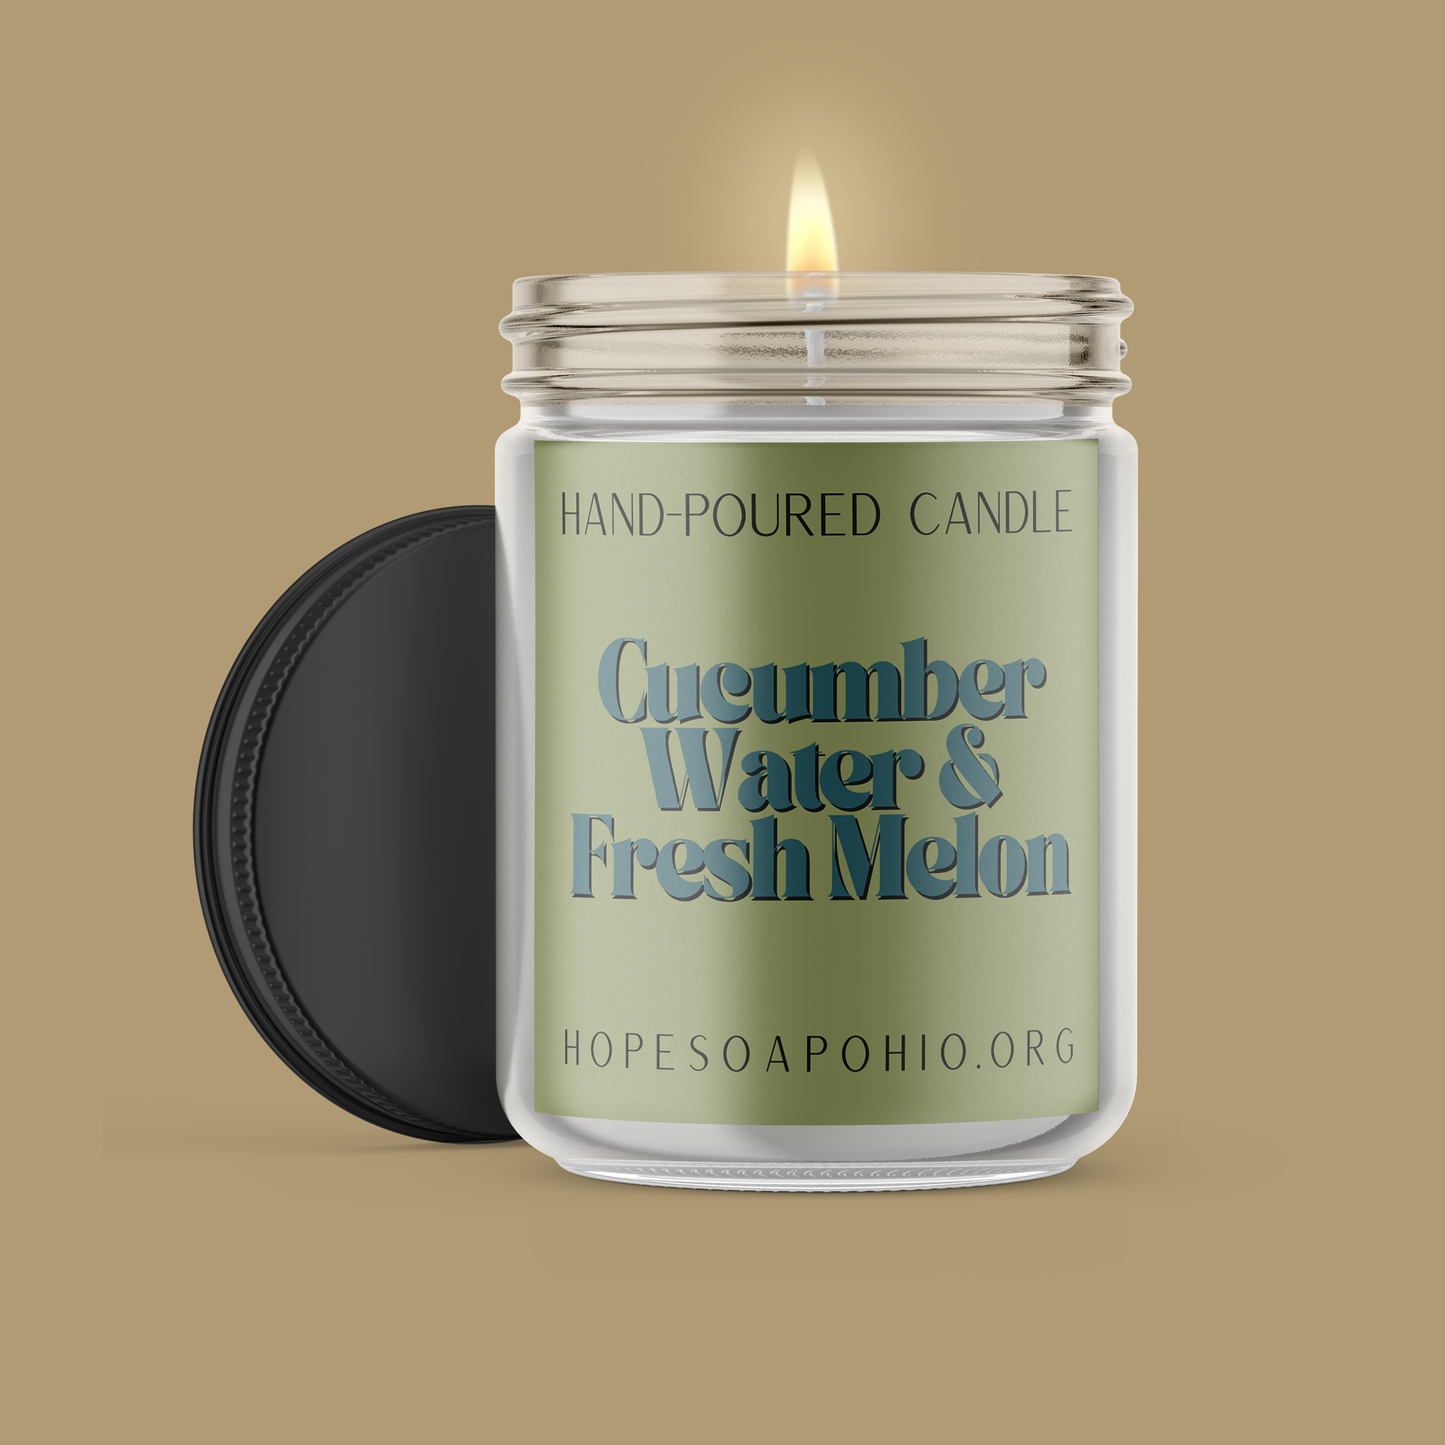 Cucumber Water and Fresh Melon Candle - HOPESOAPOHIO